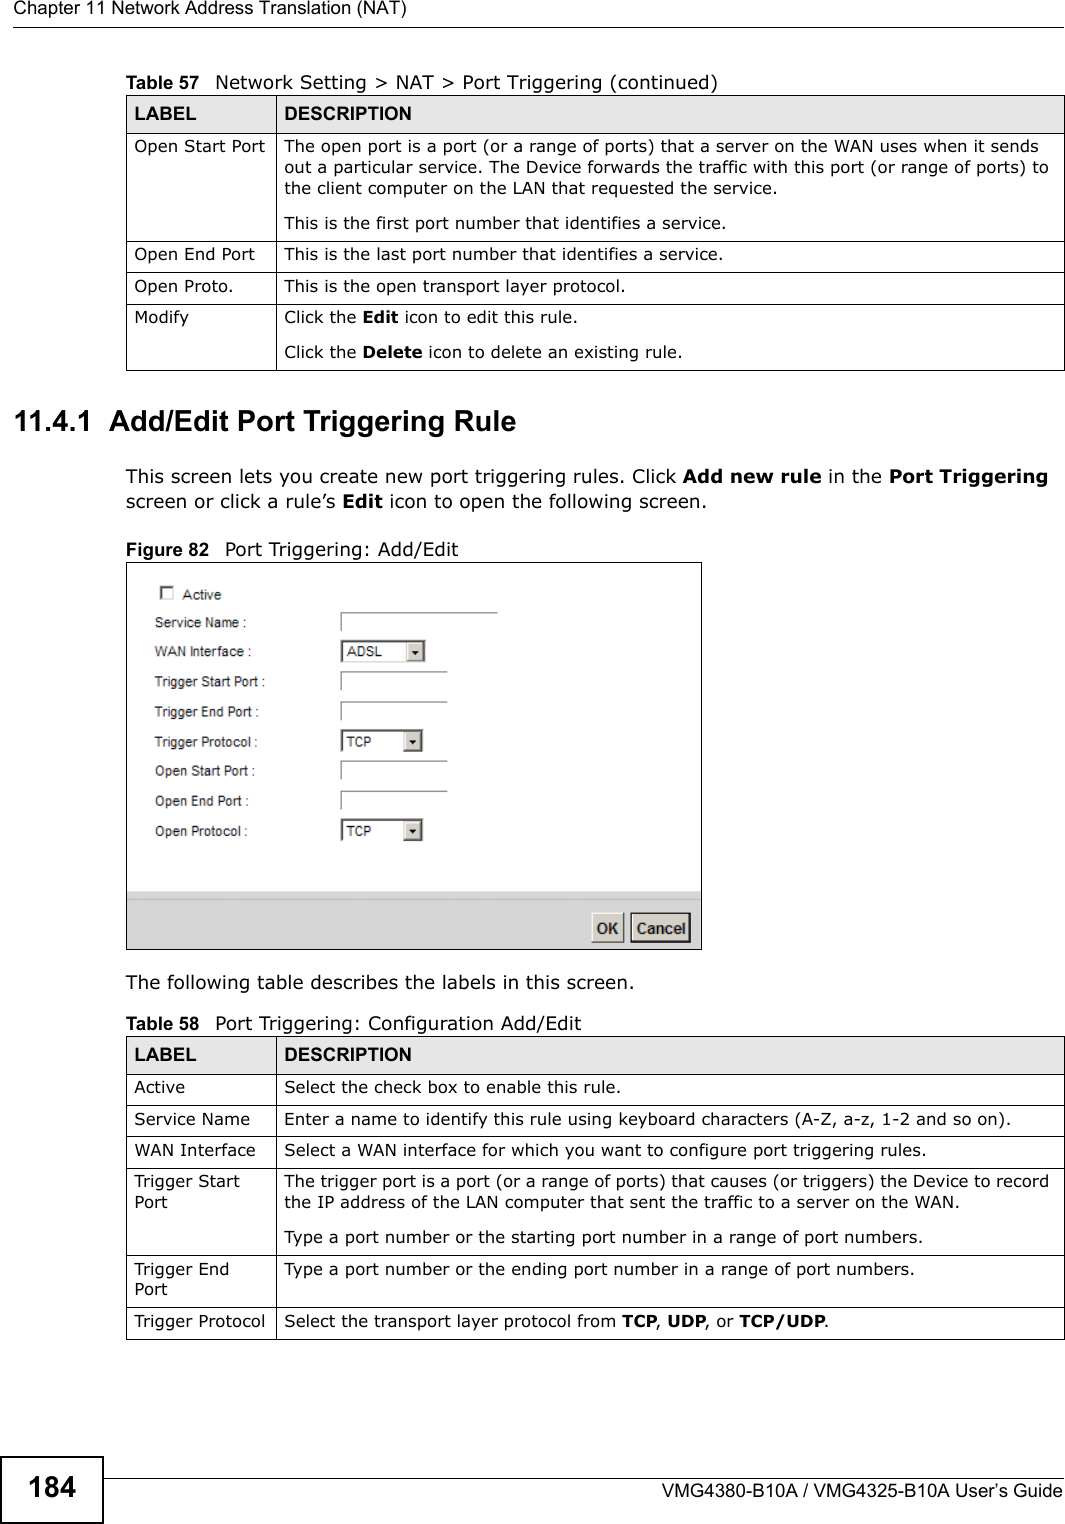 Chapter 11 Network Address Translation (NAT)VMG4380-B10A / VMG4325-B10A User’s Guide18411.4.1  Add/Edit Port Triggering Rule This screen lets you create new port triggering rules. Click Add new rule in the Port Triggeringscreen or click a rule’s Edit icon to open the following screen.Figure 82   Port Triggering: Add/Edit The following table describes the labels in this screen. Open Start Port The open port is a port (or a range of ports) that a server on the WAN uses when it sends out a particular service. The Device forwards the traffic with this port (or range of ports) tothe client computer on the LAN that requested the service.This is the first port number that identifies a service.Open End Port This is the last port number that identifies a service.Open Proto. This is the open transport layer protocol.Modify Click the Edit icon to edit this rule.Click the Delete icon to delete an existing rule. Table 57   Network Setting &gt; NAT &gt; Port Triggering (continued)LABEL DESCRIPTIONTable 58   Port Triggering: Configuration Add/EditLABEL DESCRIPTIONActive Select the check box to enable this rule.Service Name Enter a name to identify this rule using keyboard characters (A-Z, a-z, 1-2 and so on). WAN Interface Select a WAN interface for which you want to configure port triggering rules.Trigger Start PortThe trigger port is a port (or a range of ports) that causes (or triggers) the Device to record the IP address of the LAN computer that sent the traffic to a server on the WAN.Type a port number or the starting port number in a range of port numbers.Trigger End PortType a port number or the ending port number in a range of port numbers.Trigger Protocol Select the transport layer protocol from TCP, UDP, or TCP/UDP.